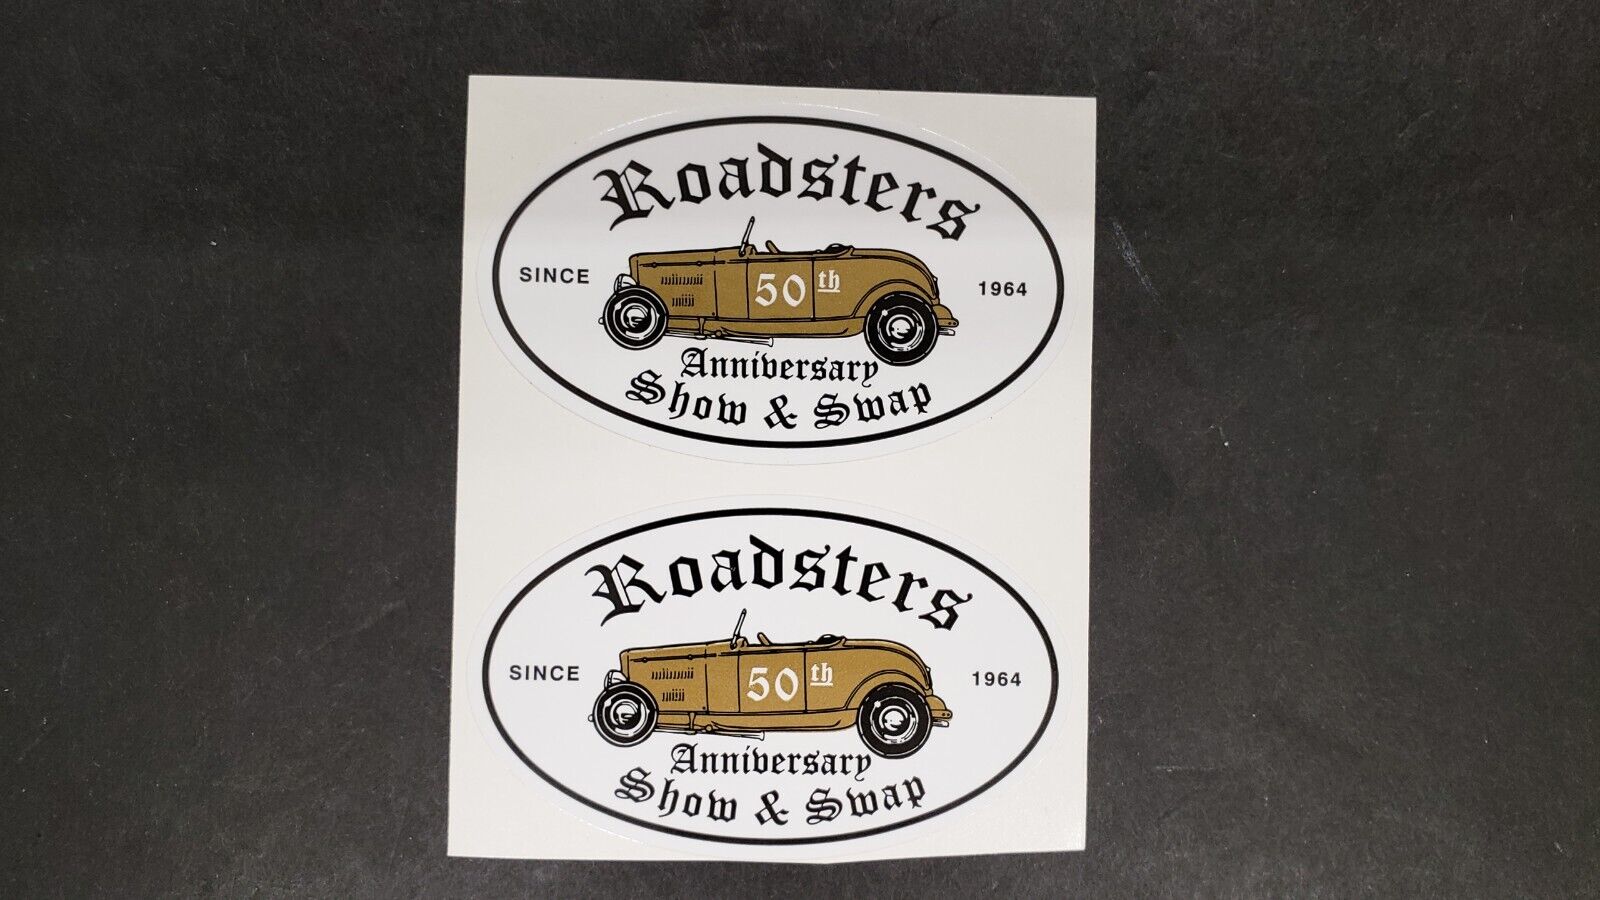 TWO L.A. ROADSTERS ROADSTER 50TH ANNIVERSARY SINCE 1964 CAR STICKERS STICKER